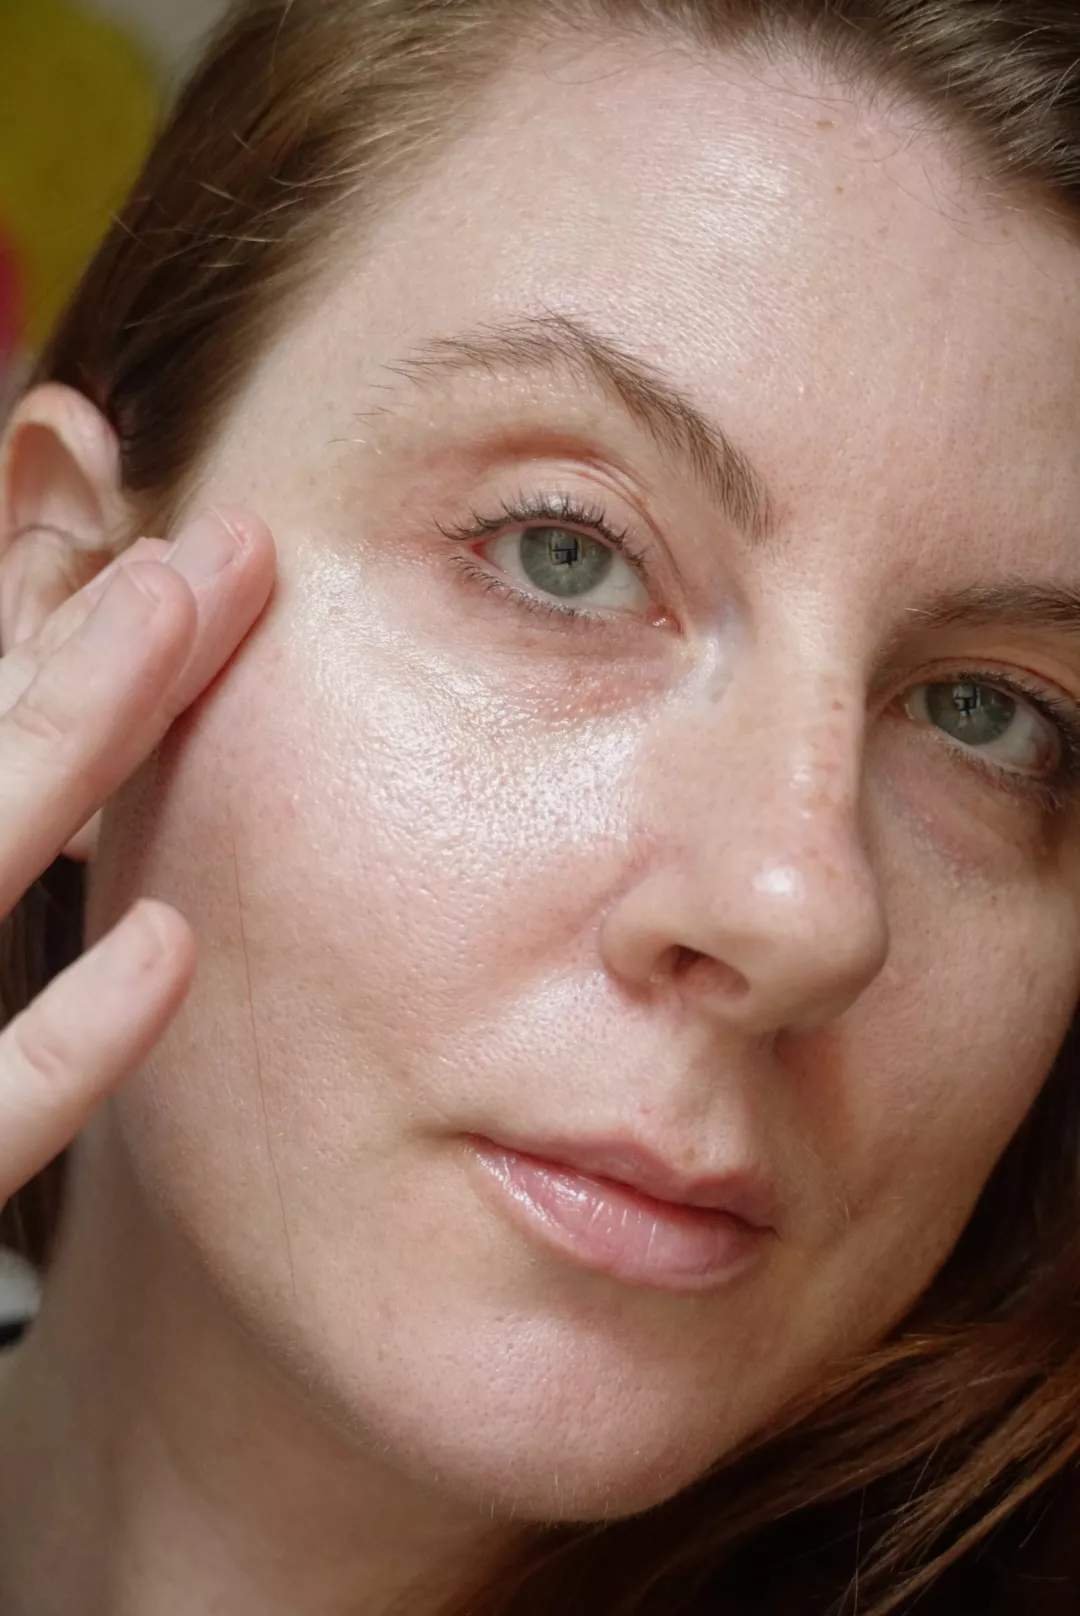 Makeup artist and Byrdie writer Ashley Rebecca with clear, makeup-free skin